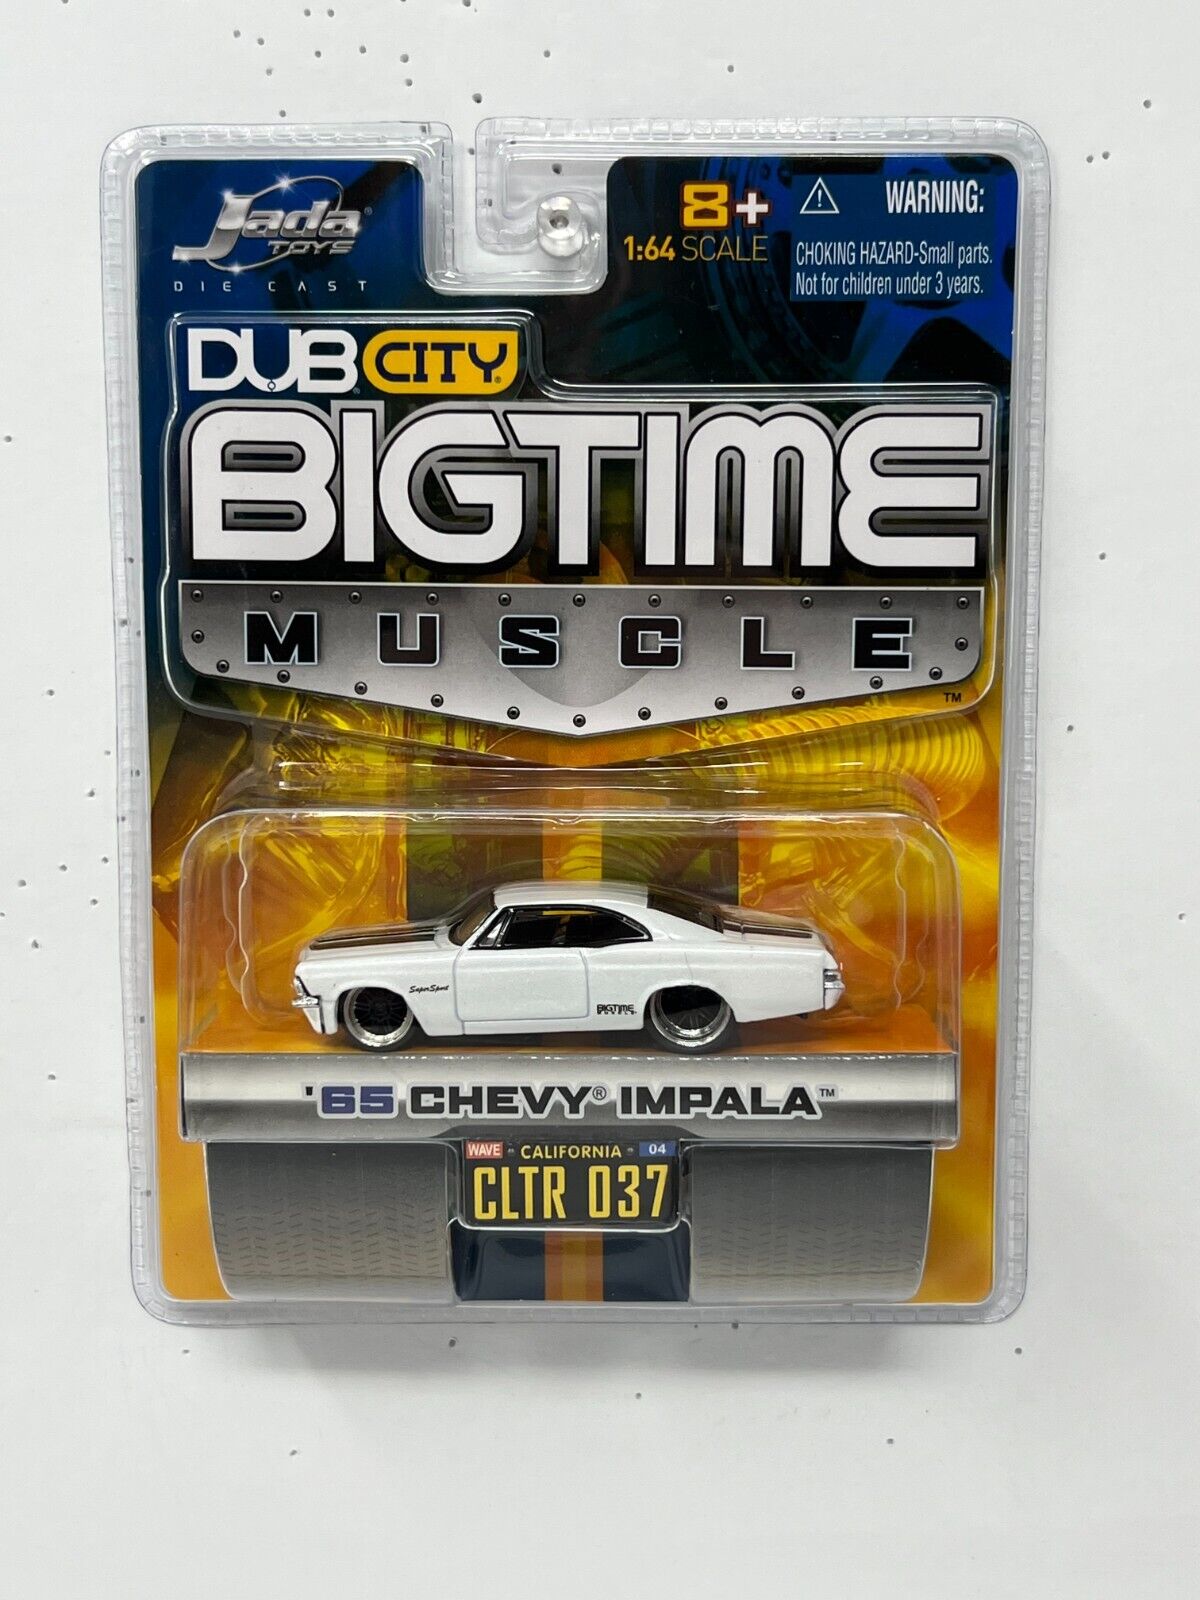 Jada Dub City Bigtime Muscle 1965 Chevy Impala 1:64 Diecast White